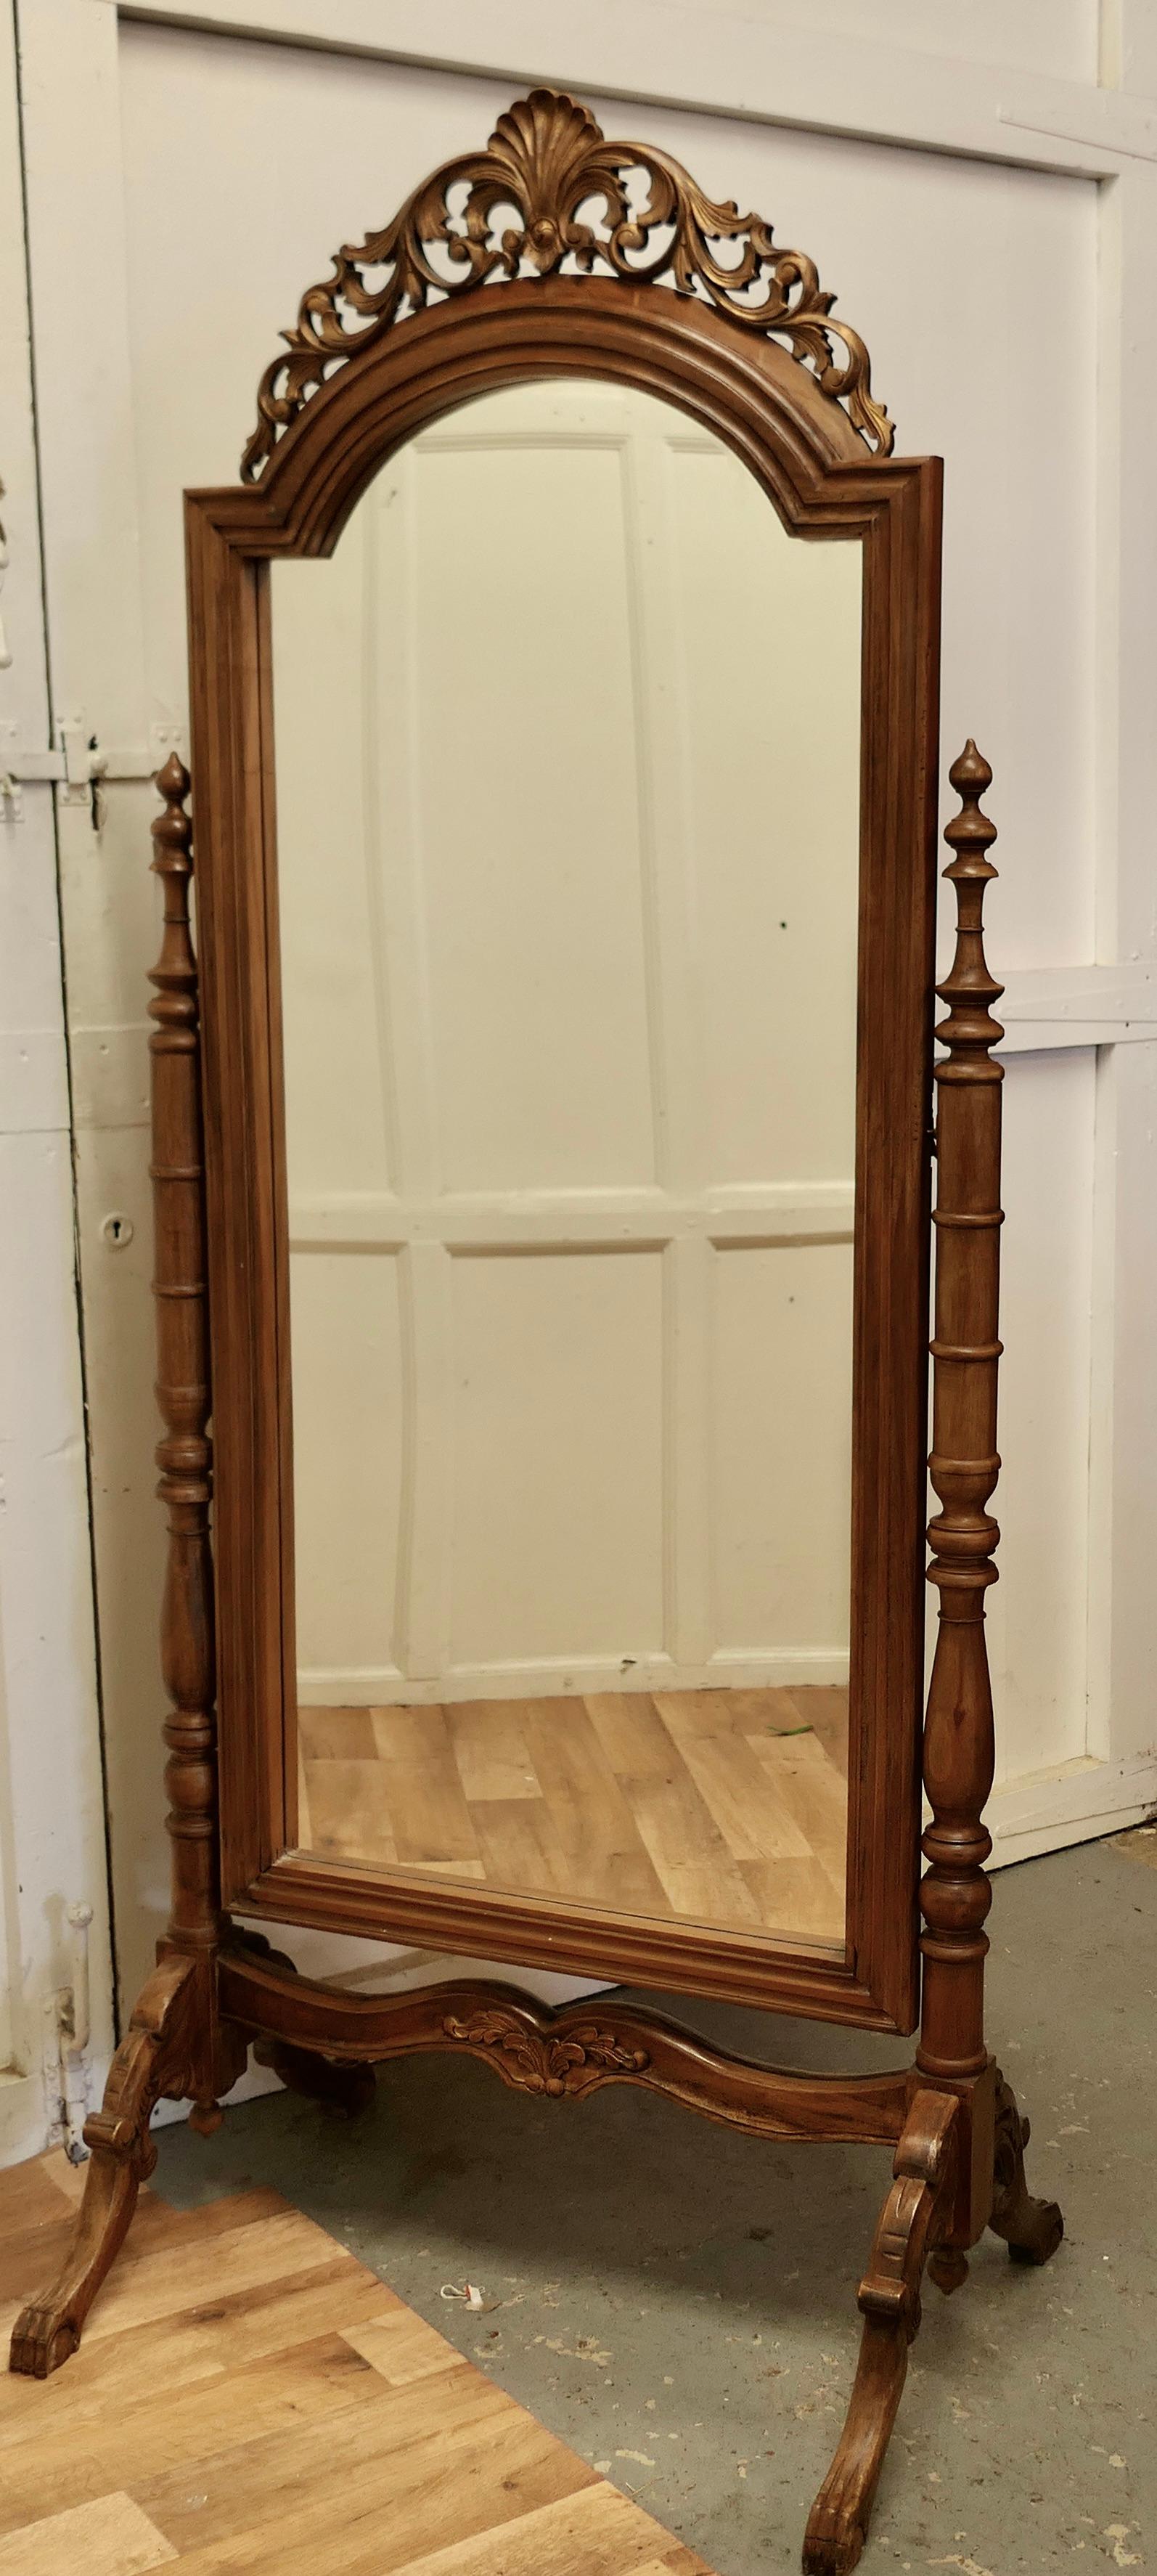 Anglo Indian Style Carved Cheval mirror

This lovely Mirror has a Shell and Acanthus carved top which has a hint of old gold decoration, it sits firmly in its stand and swivels for maximum advantage
The Stand has arching carved splayed feet with